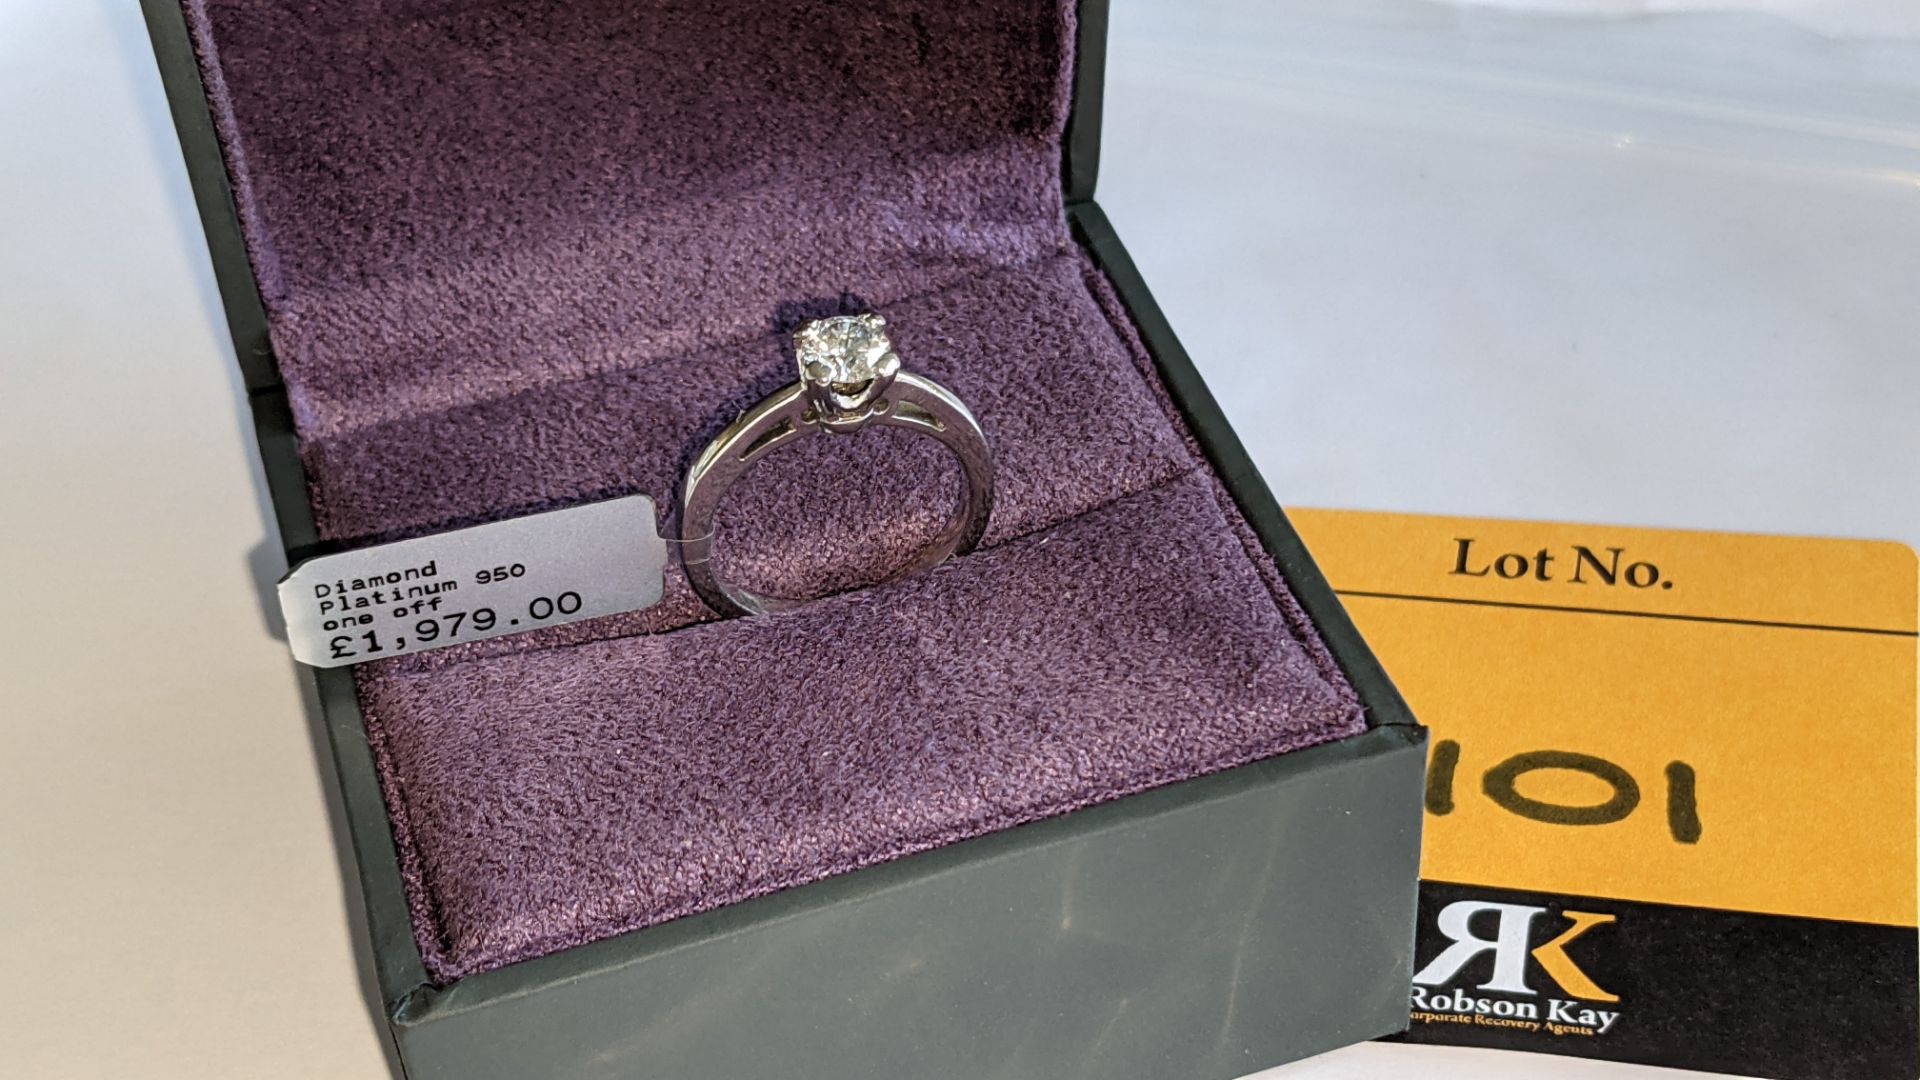 Platinum 950 ring with 0.50ct diamond. Includes diamond report/certification indicating the central